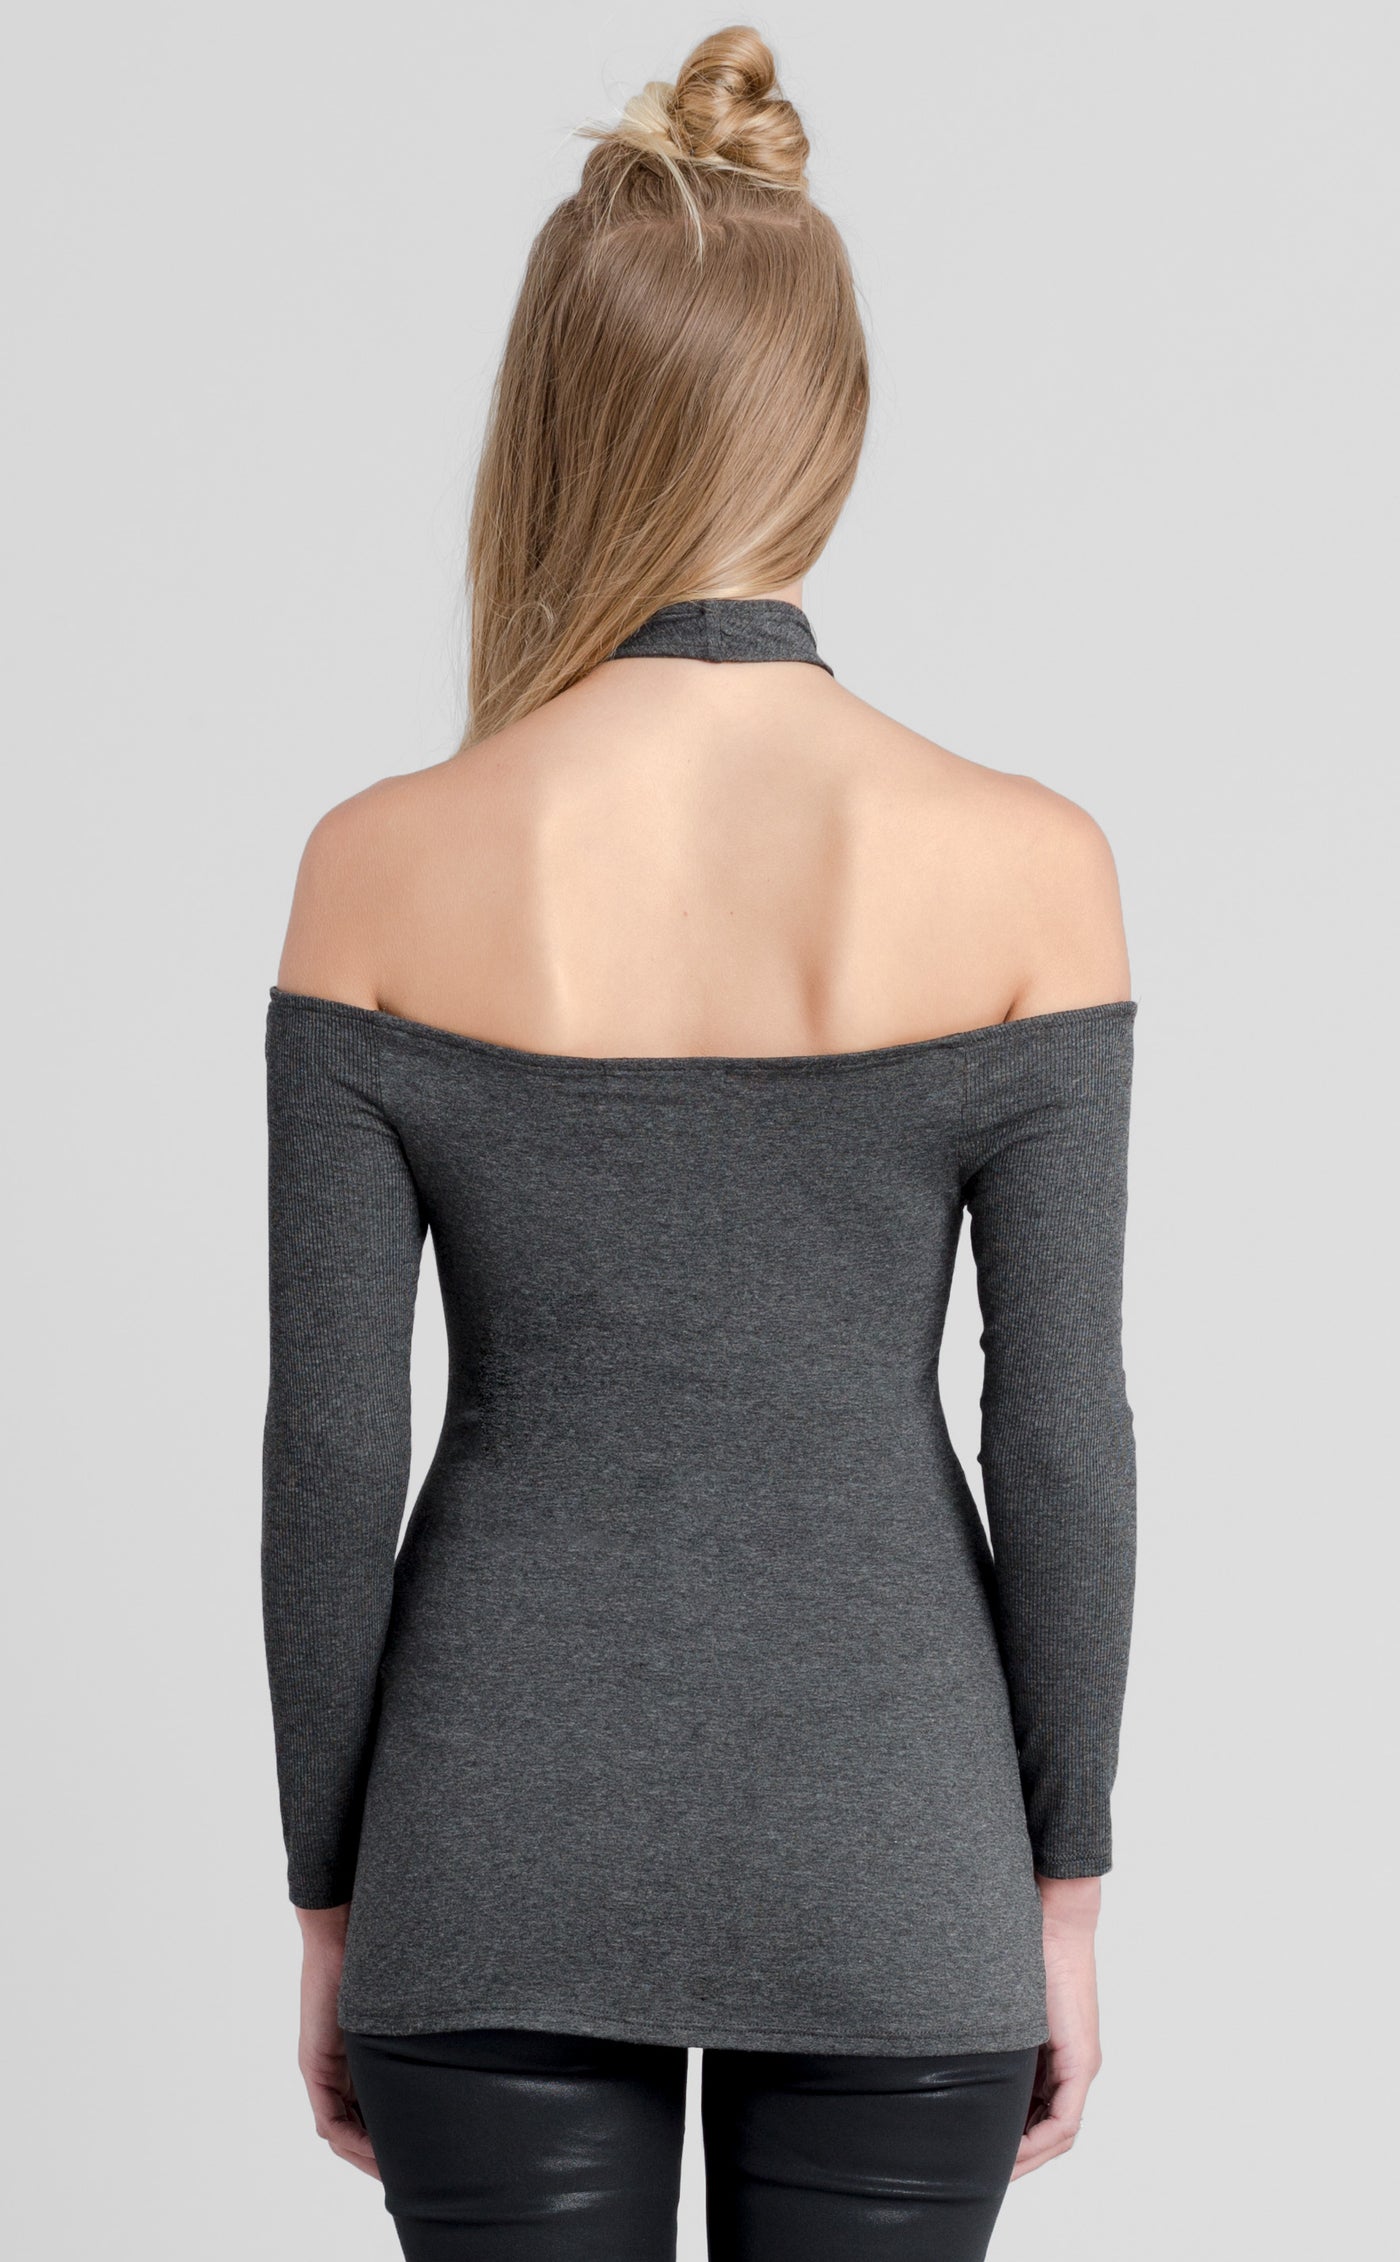 Heather Grey Cold Shoulder Bodycon Top With Key Hole